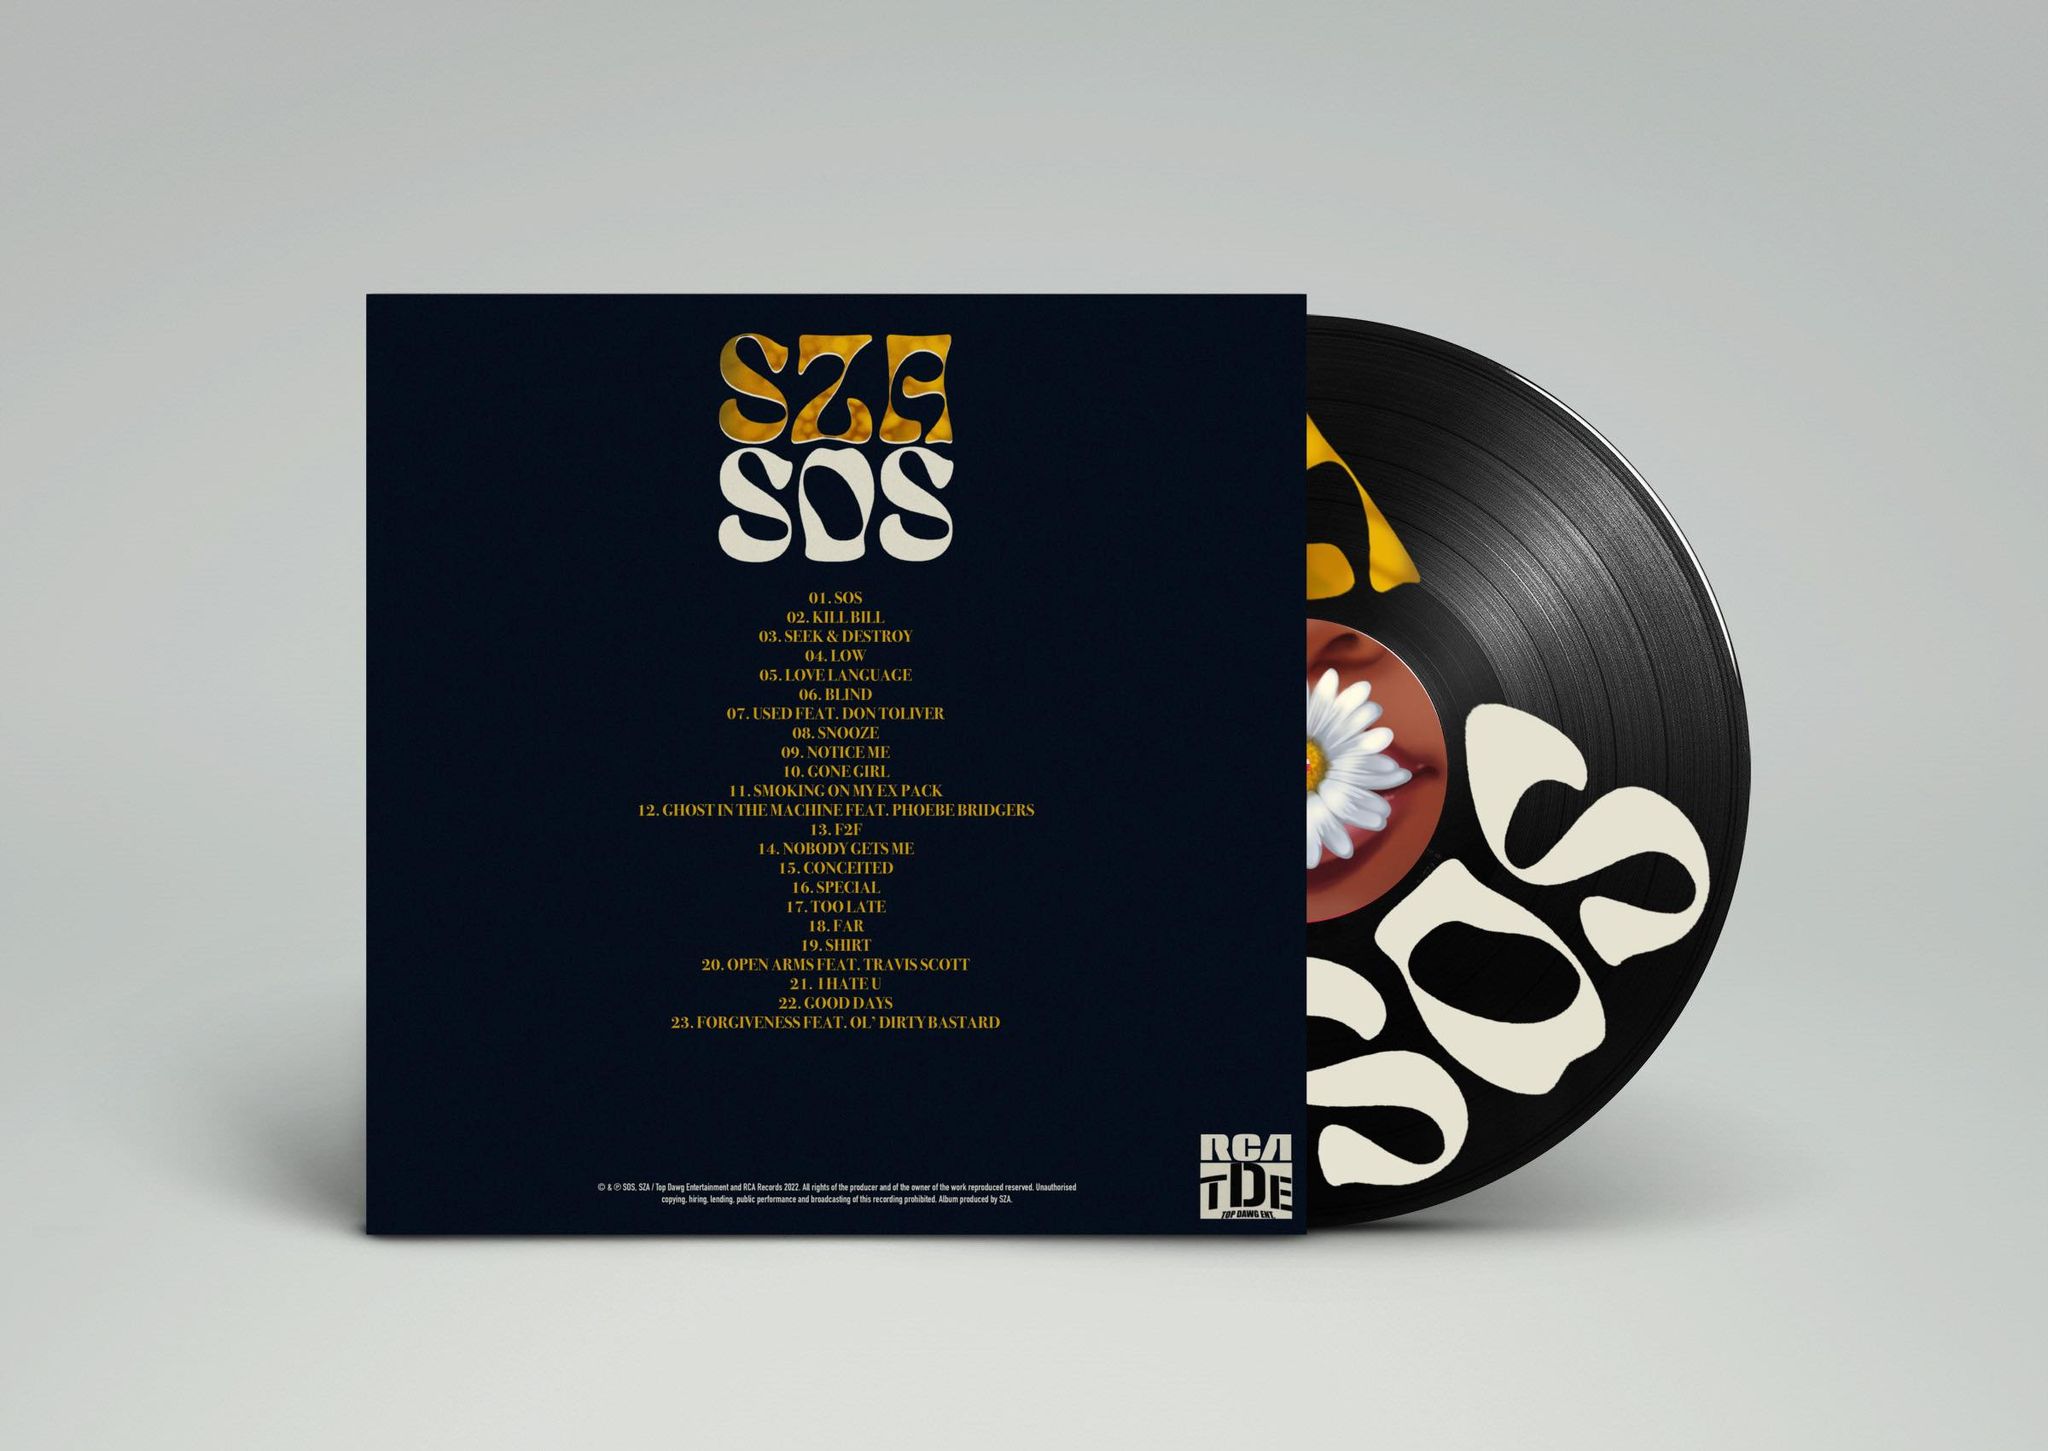 A Record Vinyl design by Sofie Grint. For the album SOS by SZA. Black and golden yellow design with text showcasing the songs in the record. The Record on the right of the album sleeve.